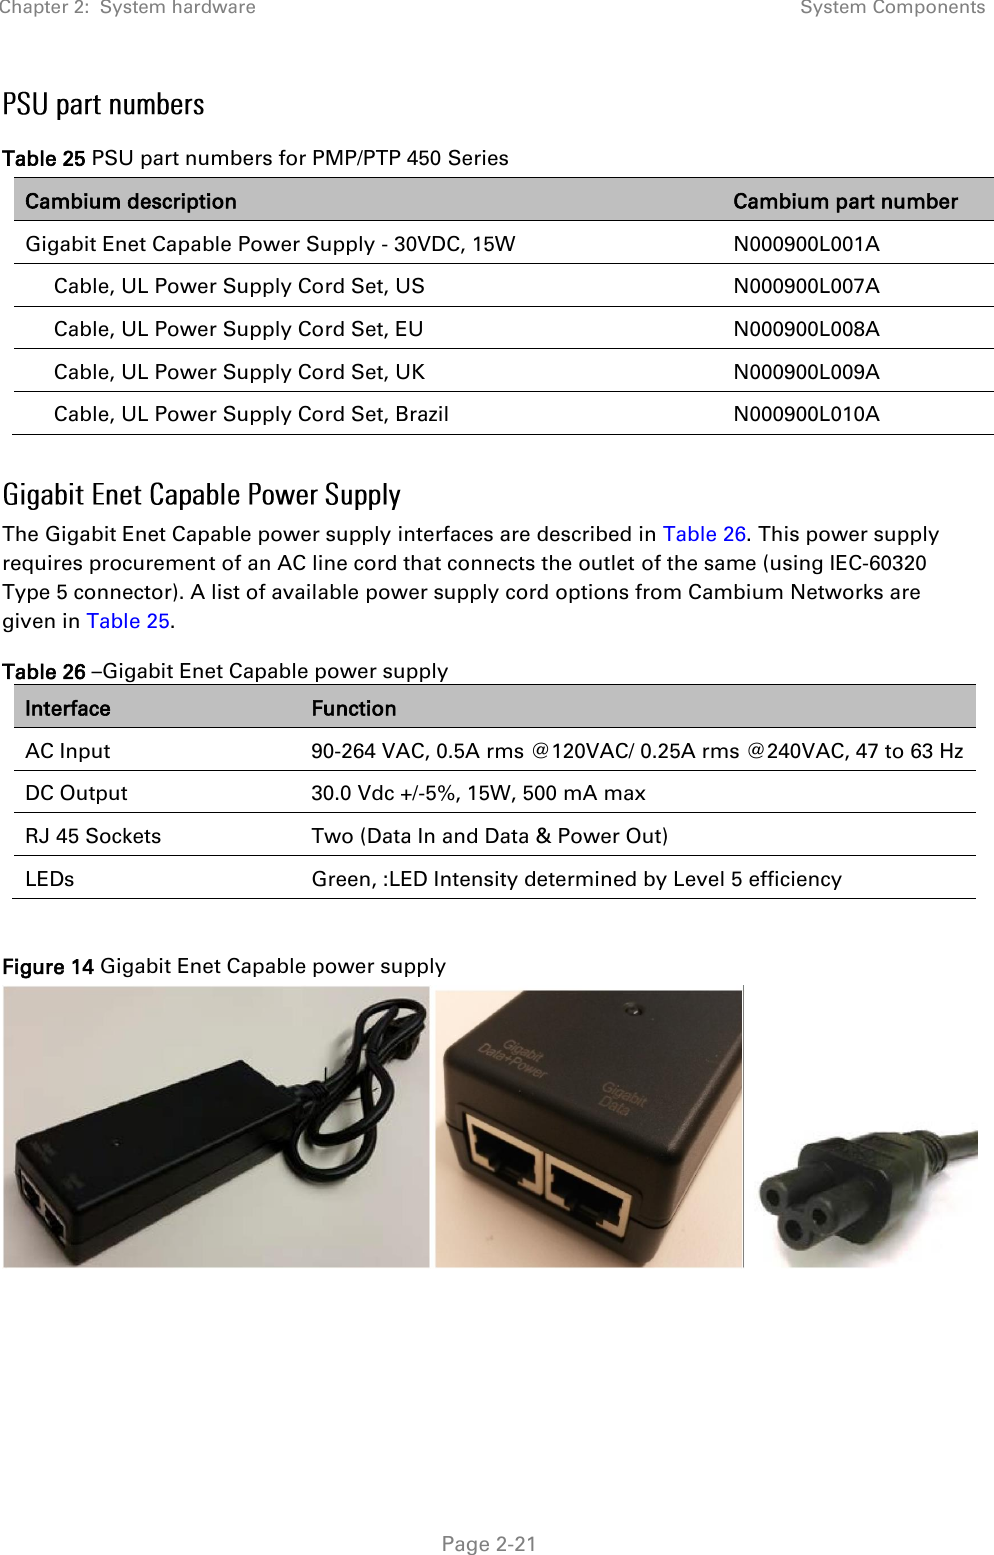 Chapter 2:  System hardware System Components   Page 2-21 Table 25 PSU part numbers for PMP/PTP 450 Series Cambium description Cambium part number Gigabit Enet Capable Power Supply - 30VDC, 15W N000900L001A      Cable, UL Power Supply Cord Set, US N000900L007A      Cable, UL Power Supply Cord Set, EU N000900L008A      Cable, UL Power Supply Cord Set, UK N000900L009A      Cable, UL Power Supply Cord Set, Brazil N000900L010A  The Gigabit Enet Capable power supply interfaces are described in Table 26. This power supply requires procurement of an AC line cord that connects the outlet of the same (using IEC-60320 Type 5 connector). A list of available power supply cord options from Cambium Networks are given in Table 25. Table 26 –Gigabit Enet Capable power supply Interface Function AC Input 90-264 VAC, 0.5A rms @120VAC/ 0.25A rms @240VAC, 47 to 63 Hz DC Output 30.0 Vdc +/-5%, 15W, 500 mA max RJ 45 Sockets Two (Data In and Data &amp; Power Out) LEDs Green, :LED Intensity determined by Level 5 efficiency  Figure 14 Gigabit Enet Capable power supply     